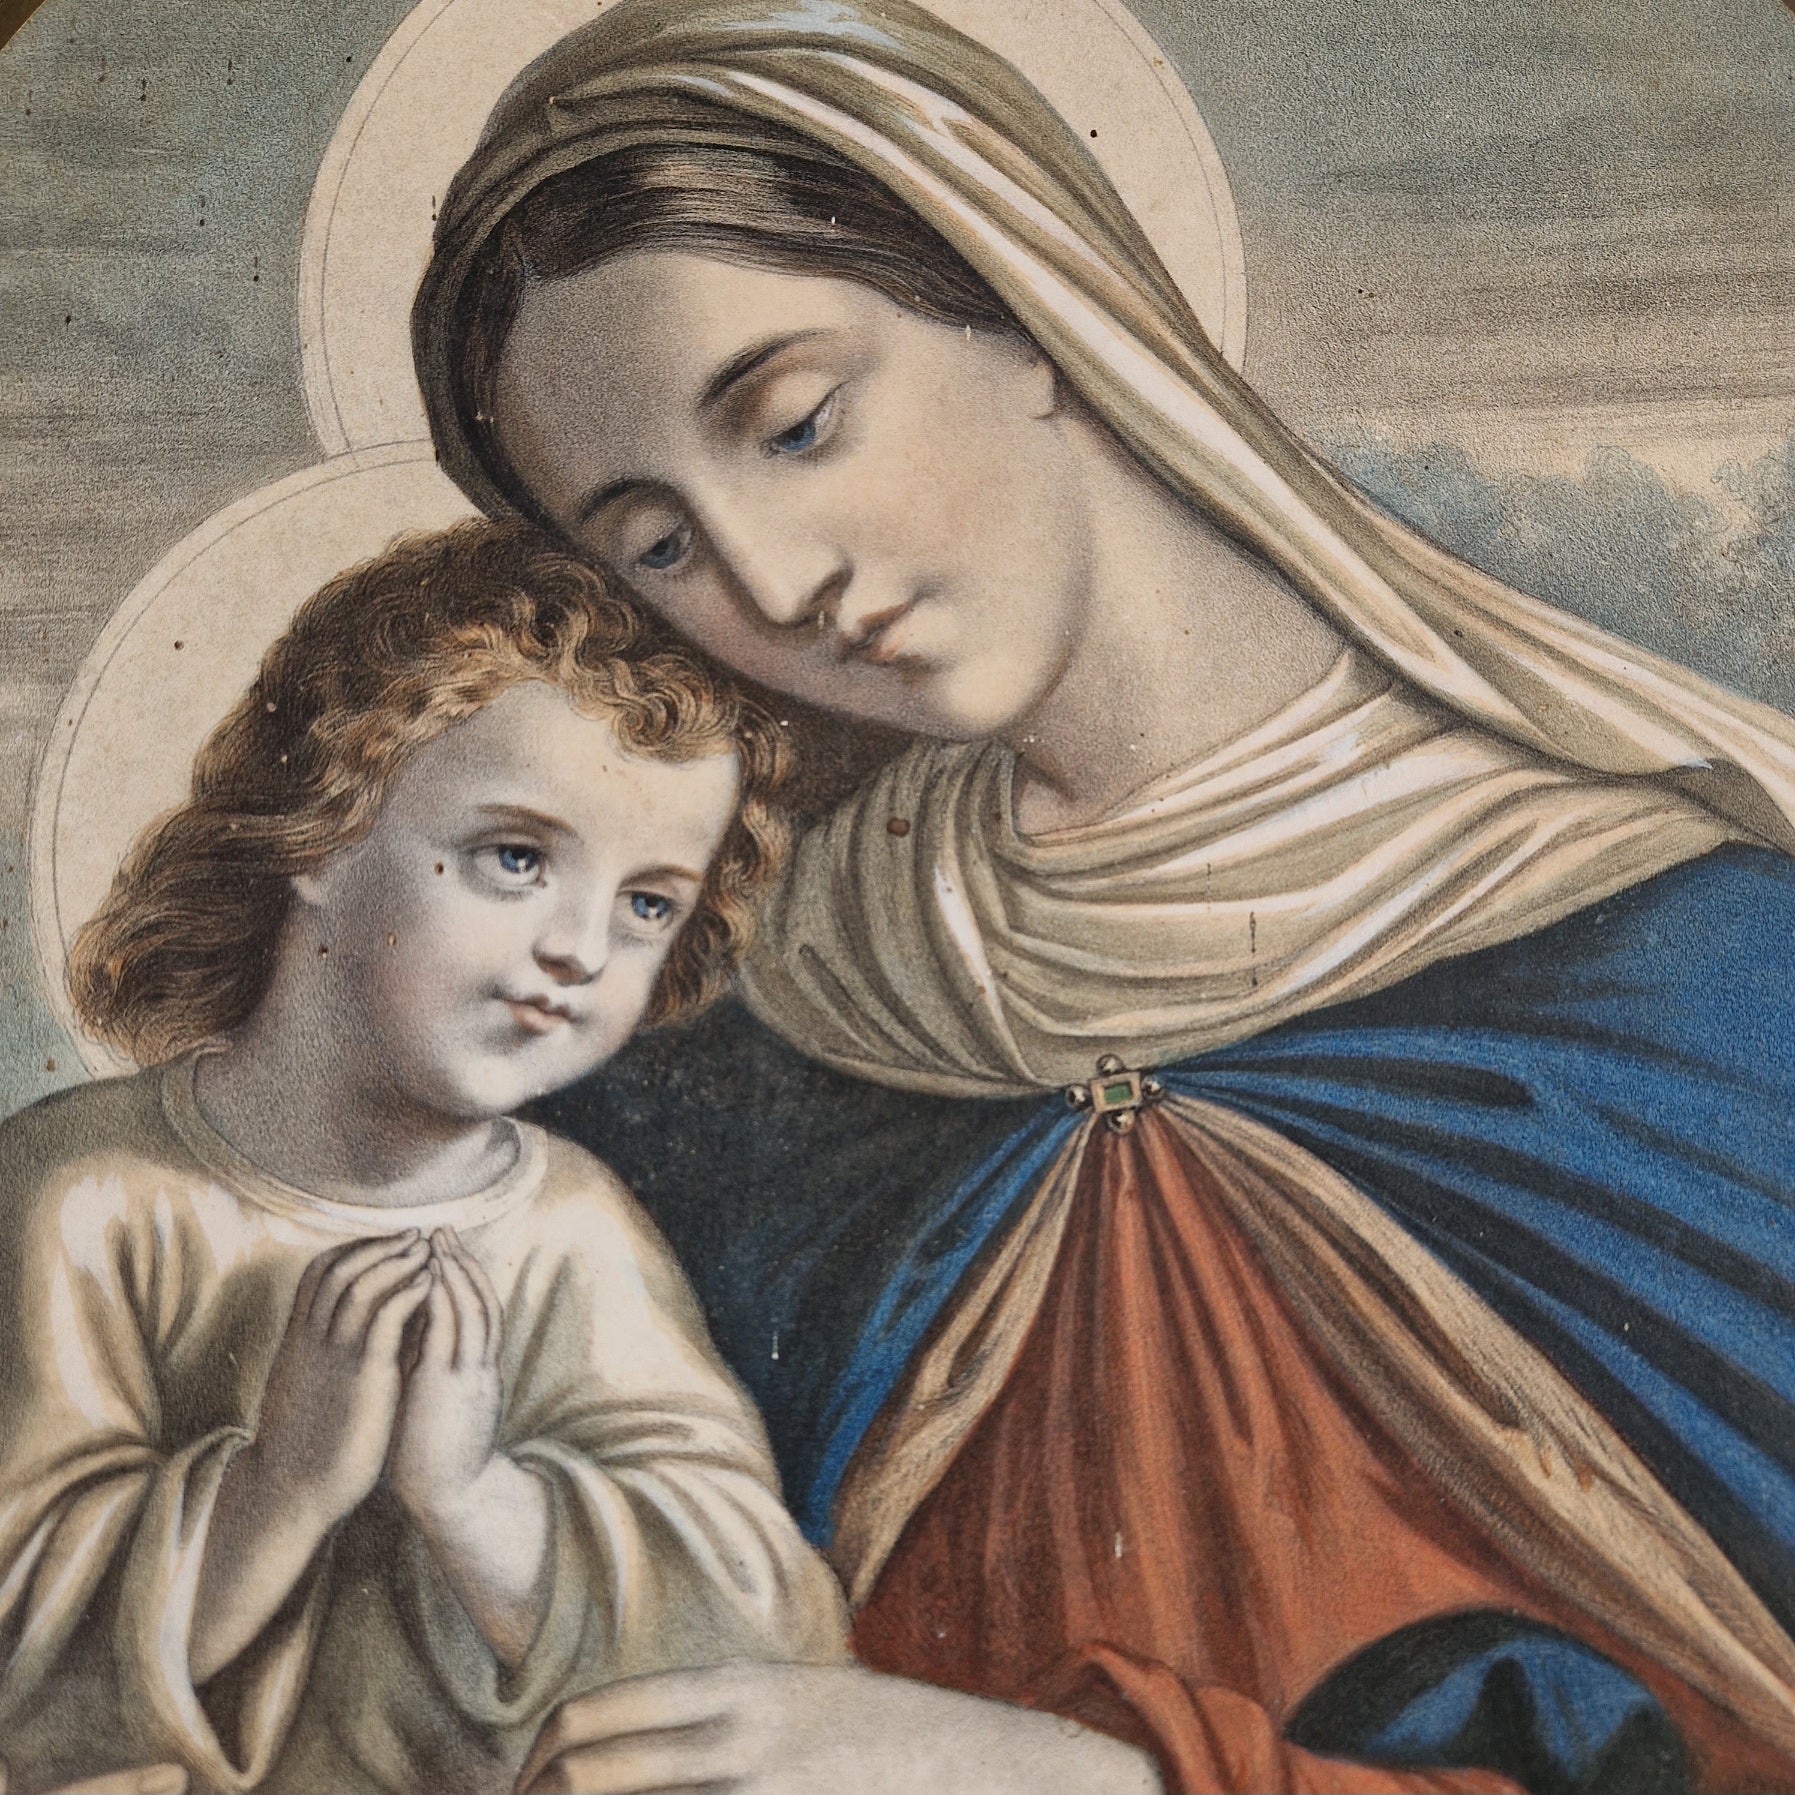 French vintage lithograph print of the Madonna and child.